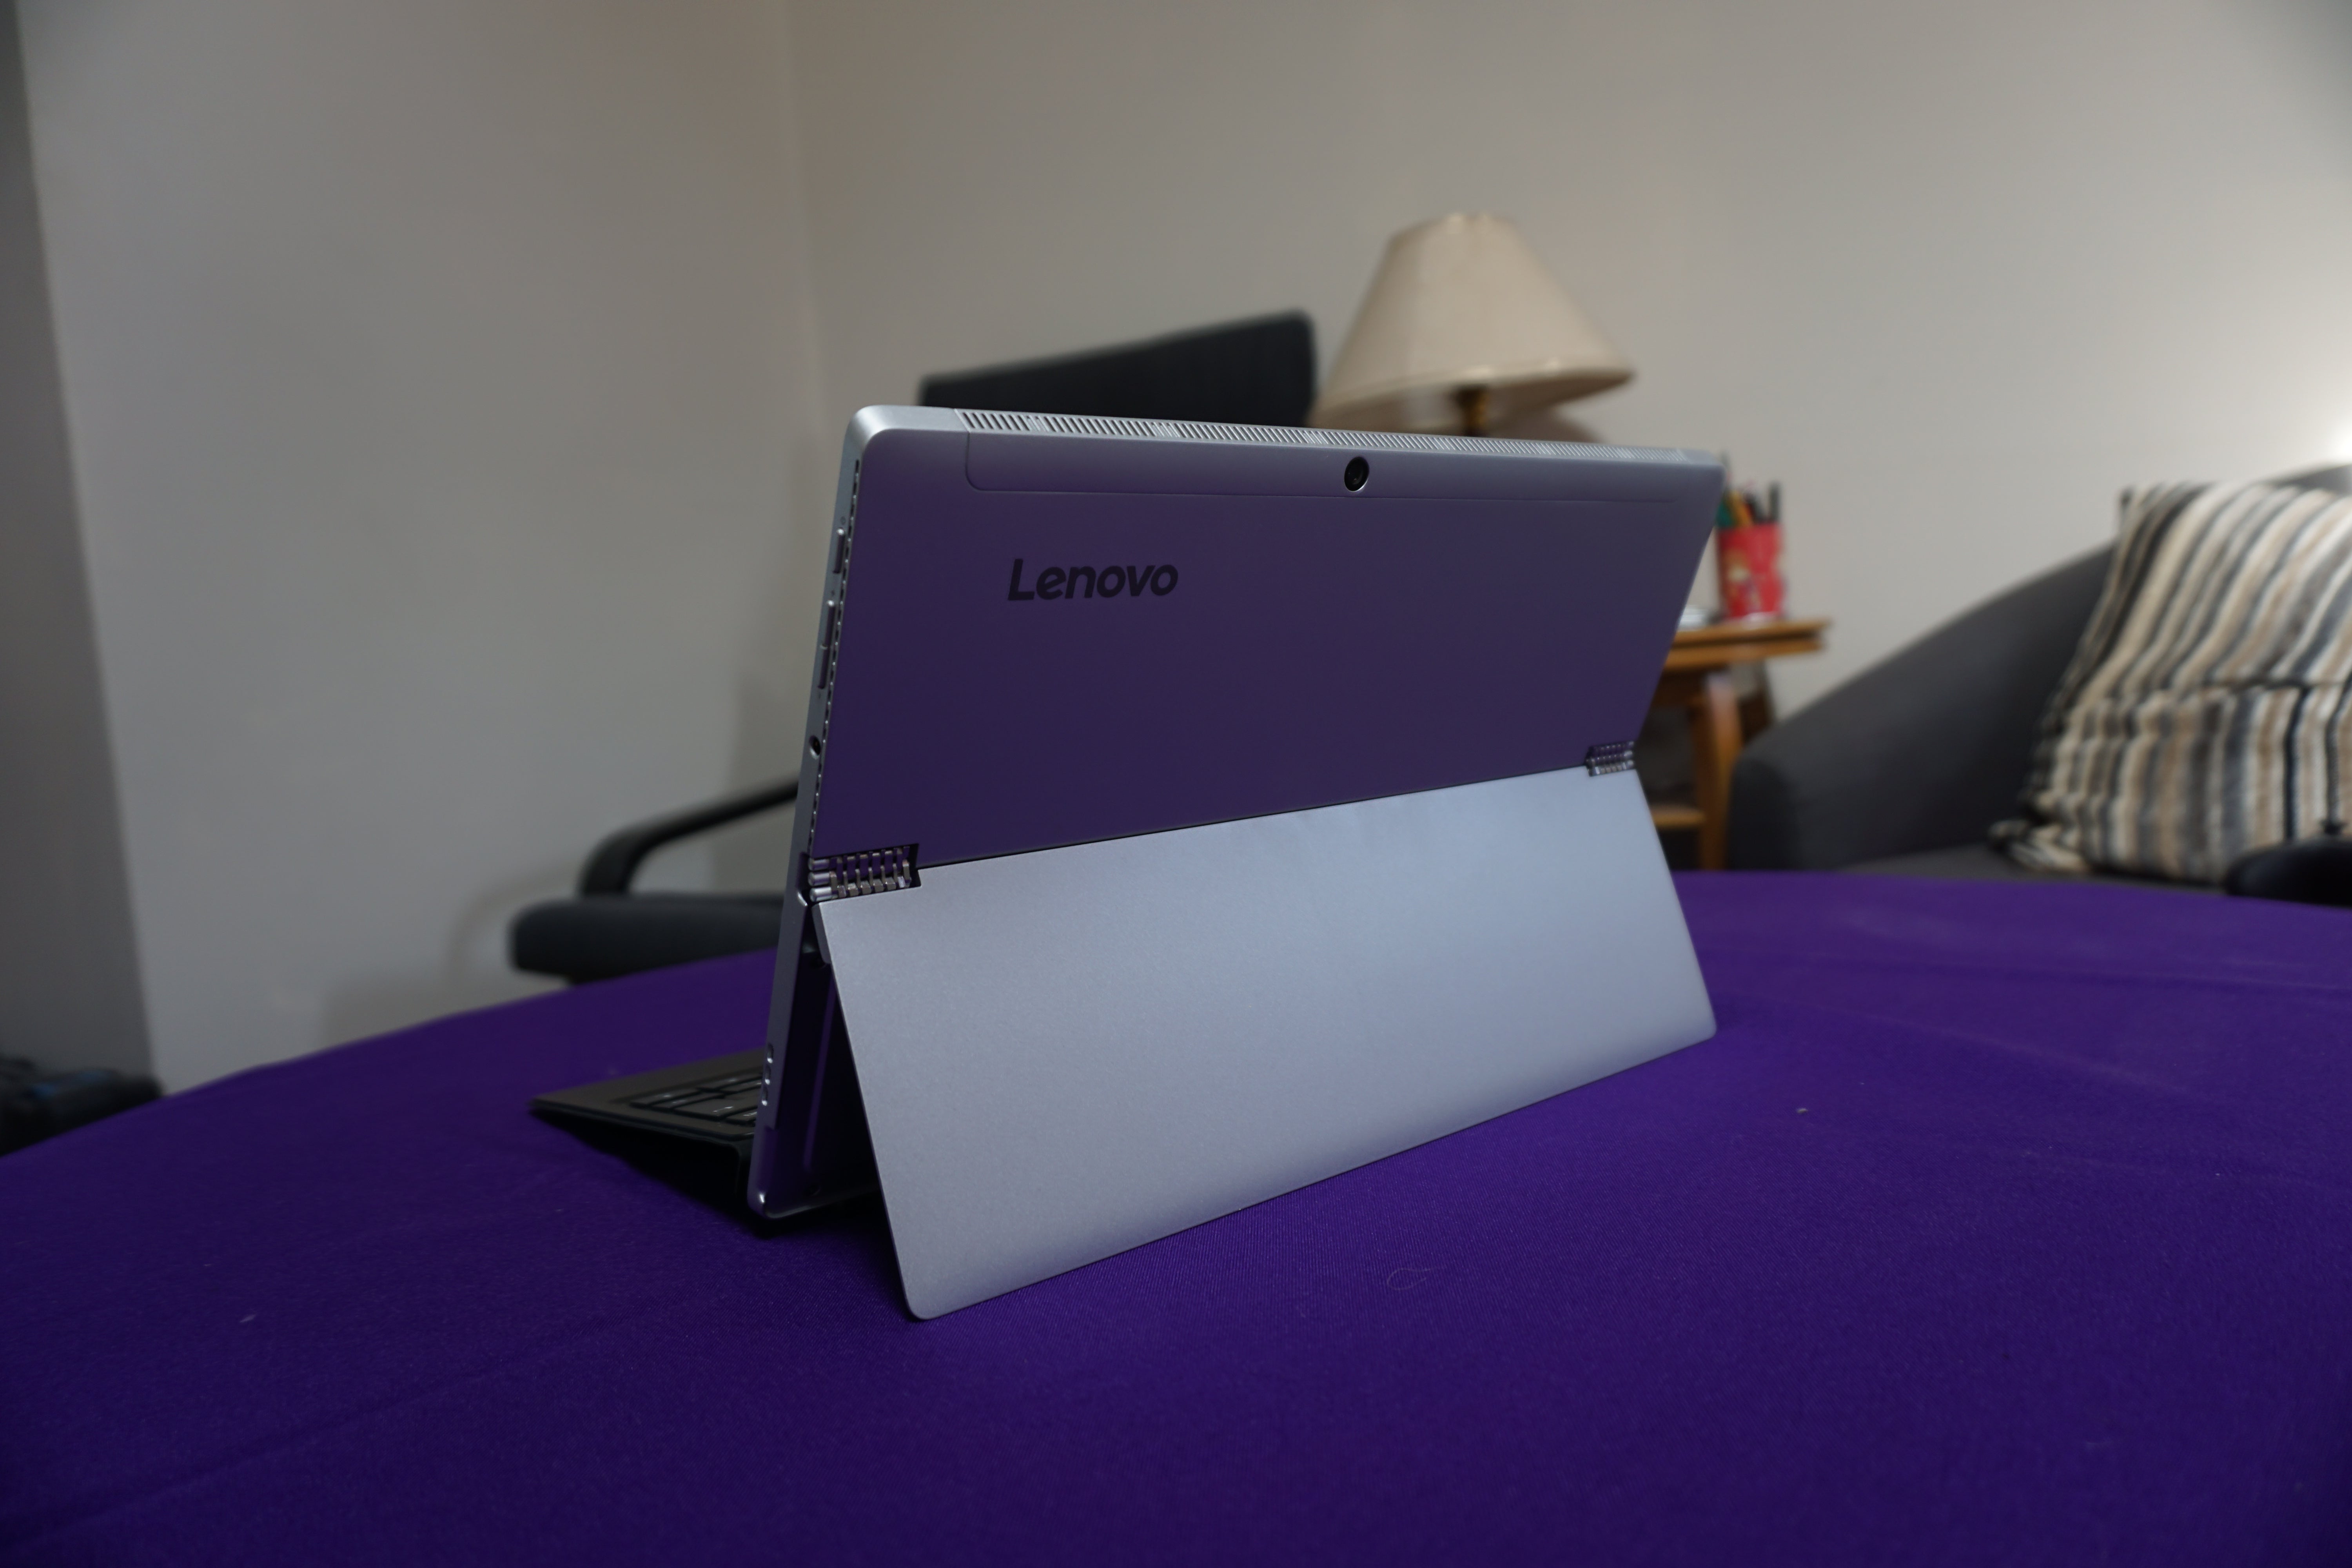 Lenovo Miix 510 convertible tablet with keyboard on purple surface.